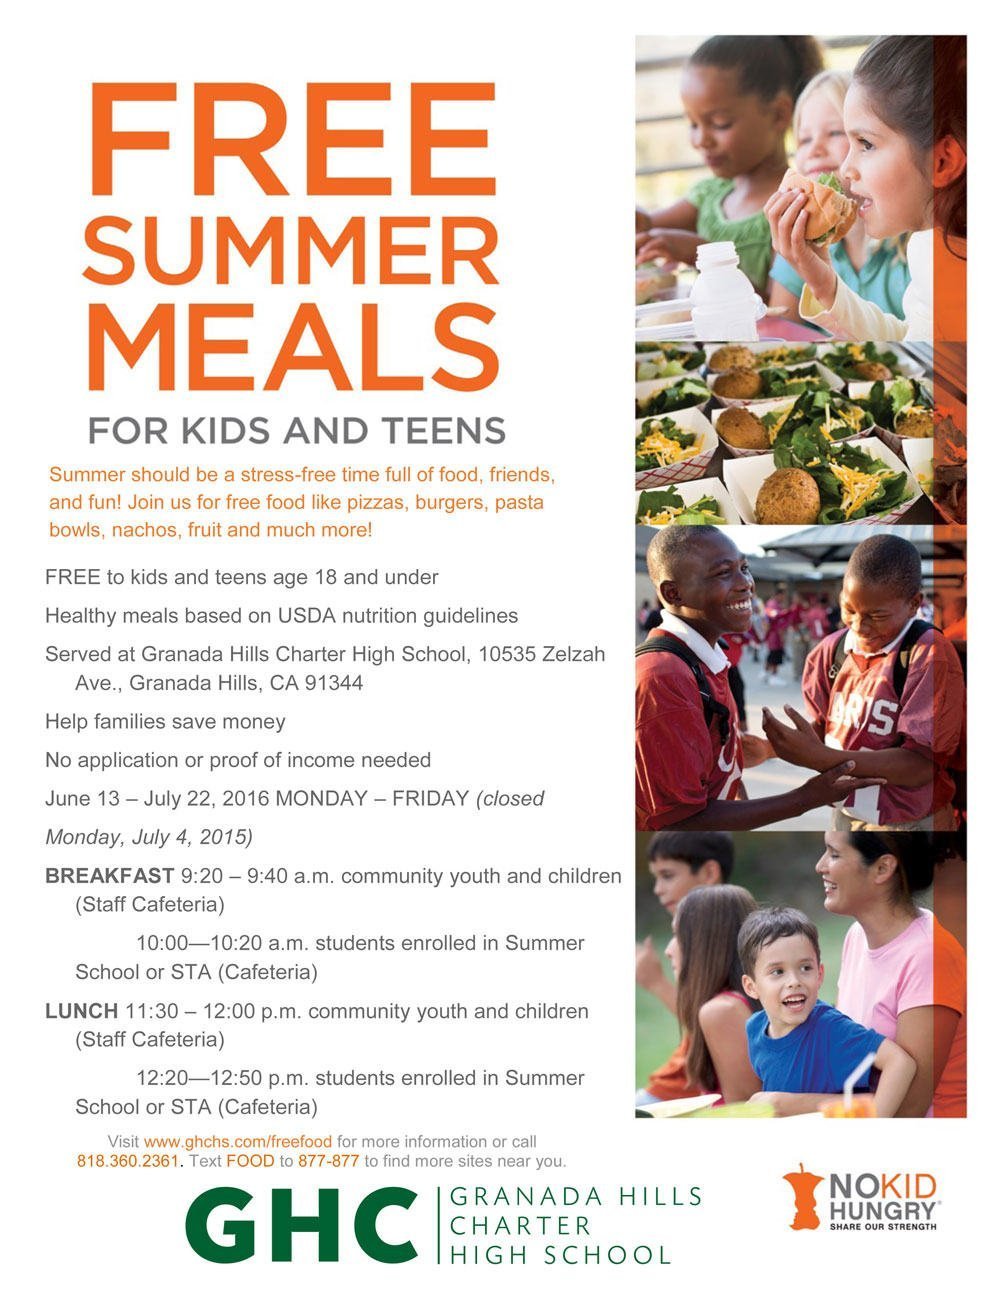 Free Summer Meals for Kids and Teens Age 18 and Under!